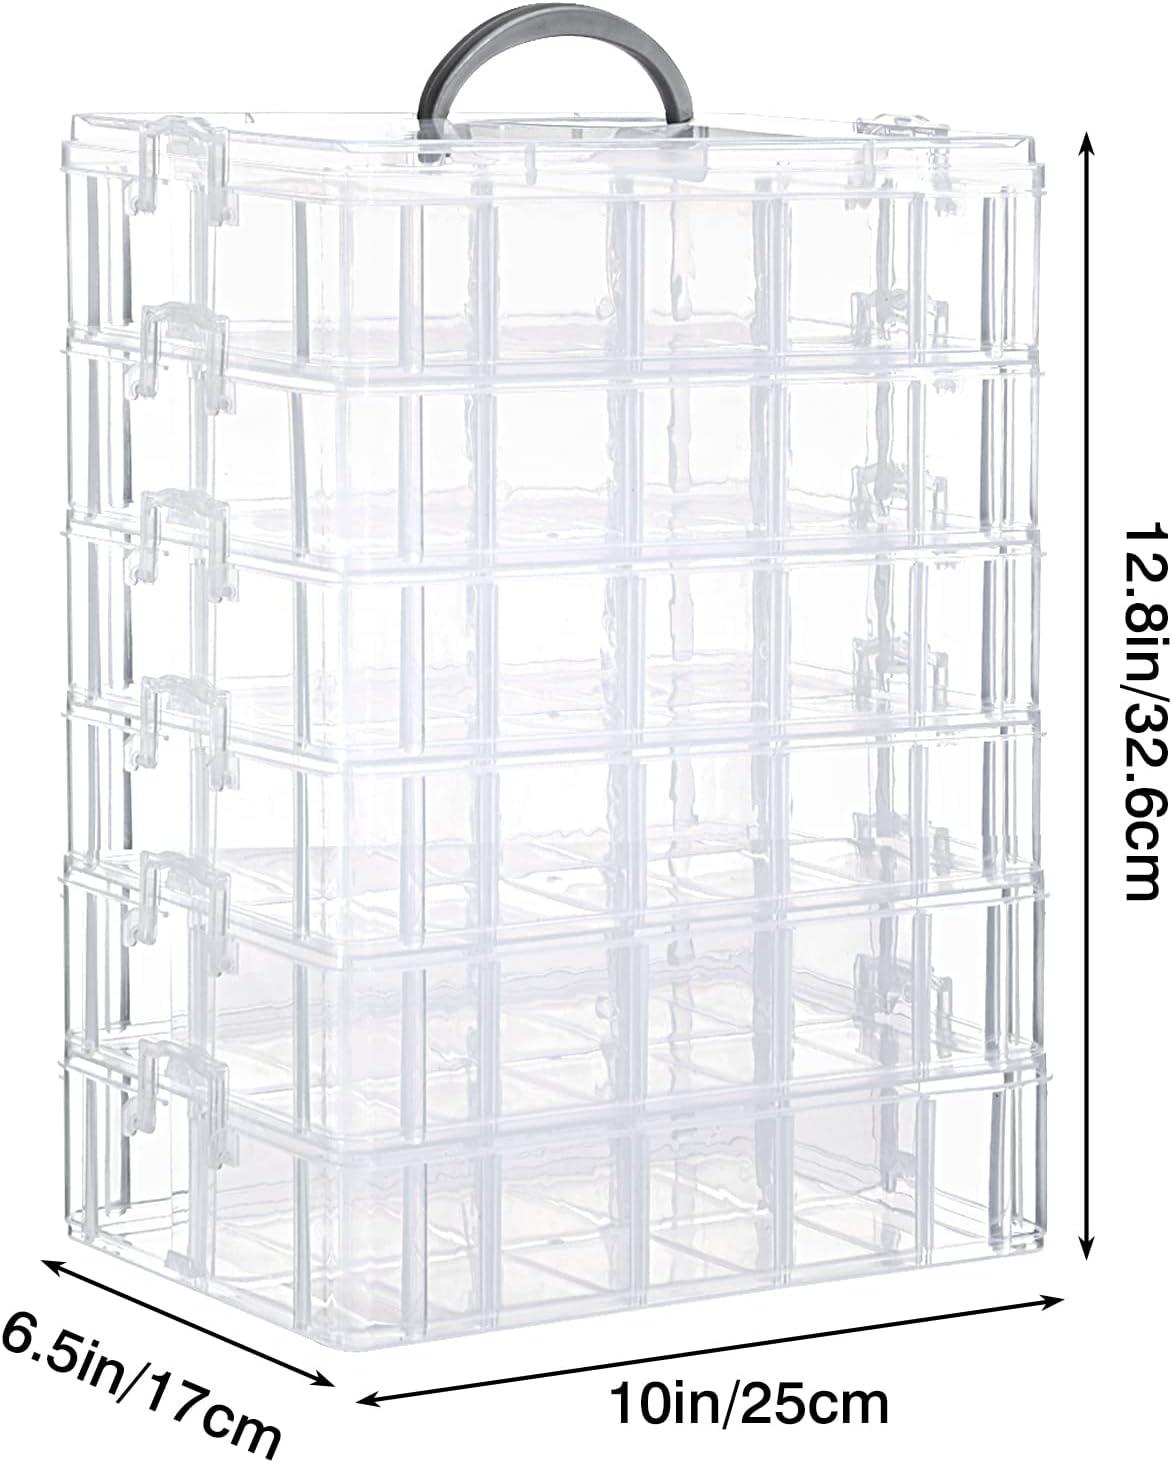 Casewin 3-Tier Clear Stackable Storage Container, Organizer Box with 30 Compartments(Adjustable),for Organizing Arts and Crafts,Washi Tapes,Beads,Kids